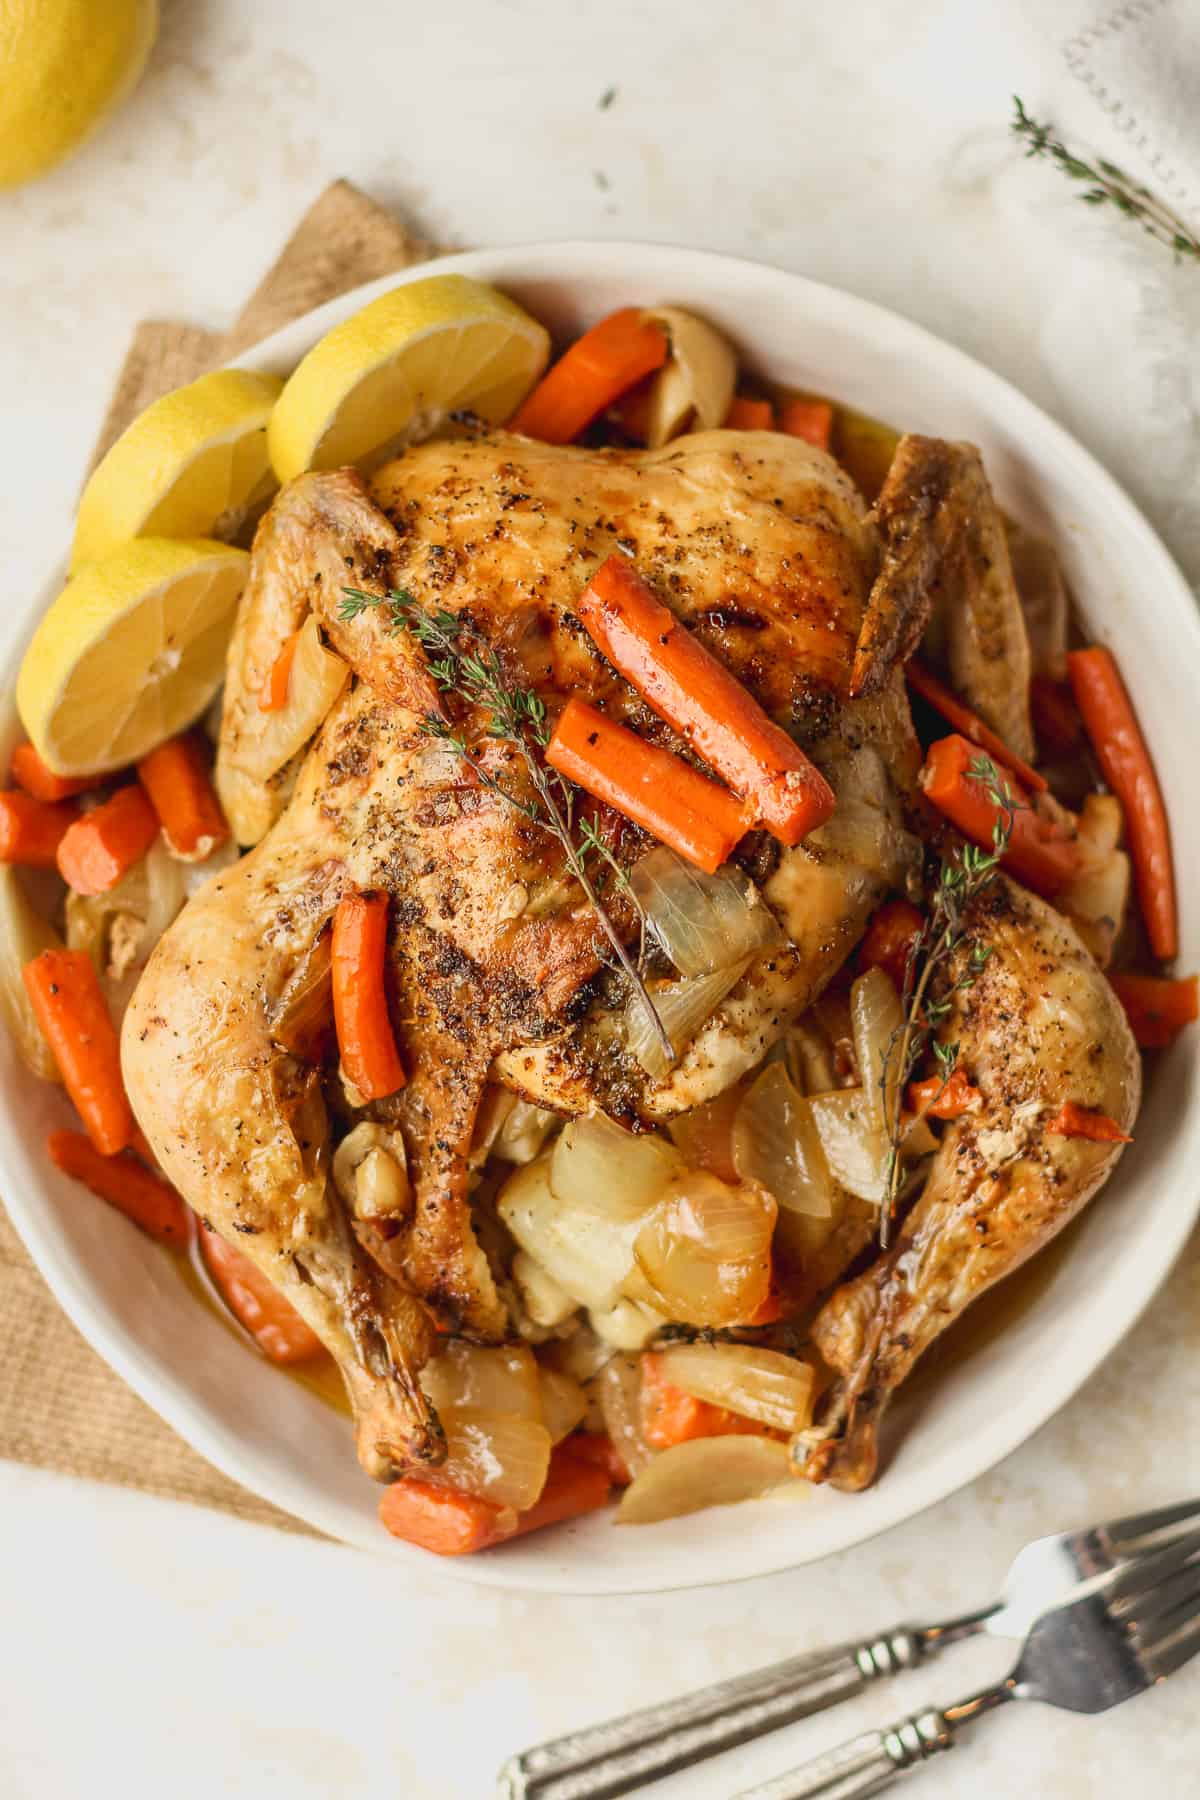 A dish with a whole roasted chicken with lemon.